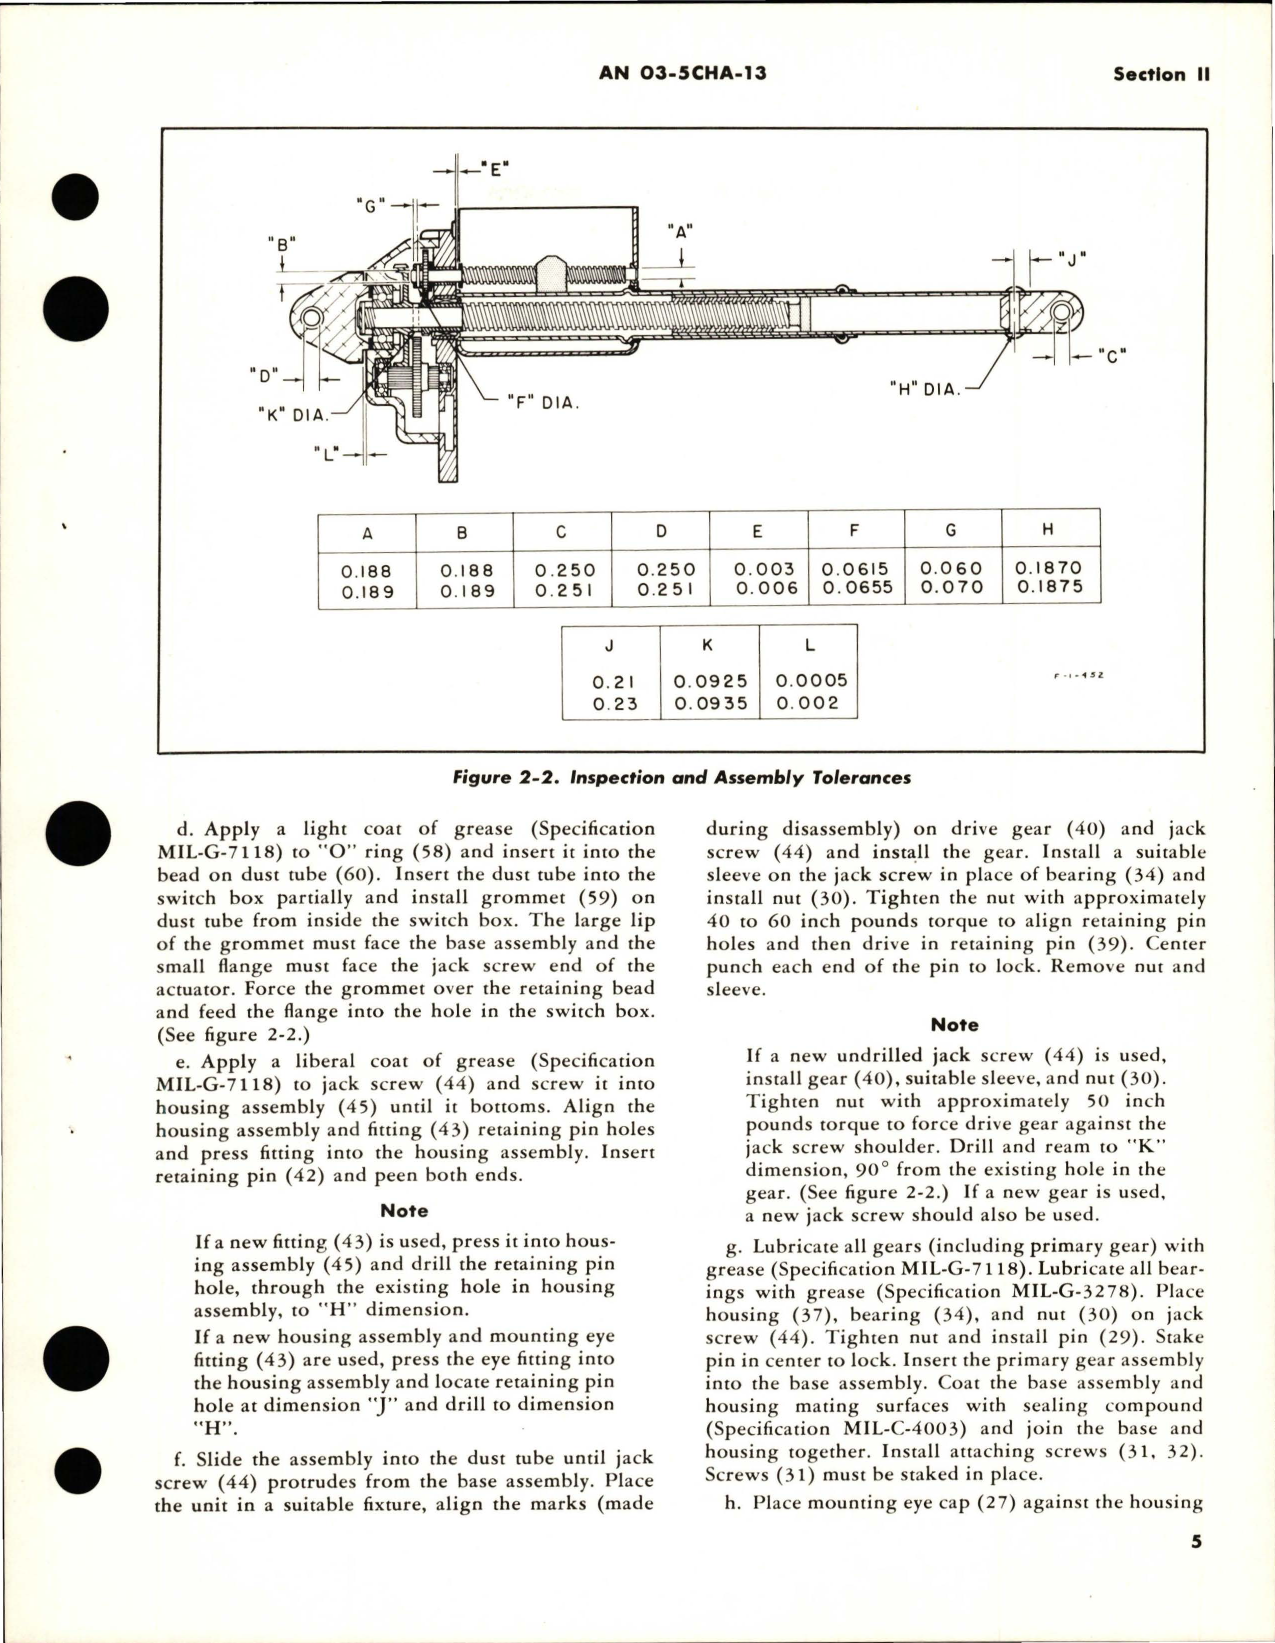 Sample page 9 from AirCorps Library document: Overhaul Instructions for Electro-Mechanical Linear Actuators 